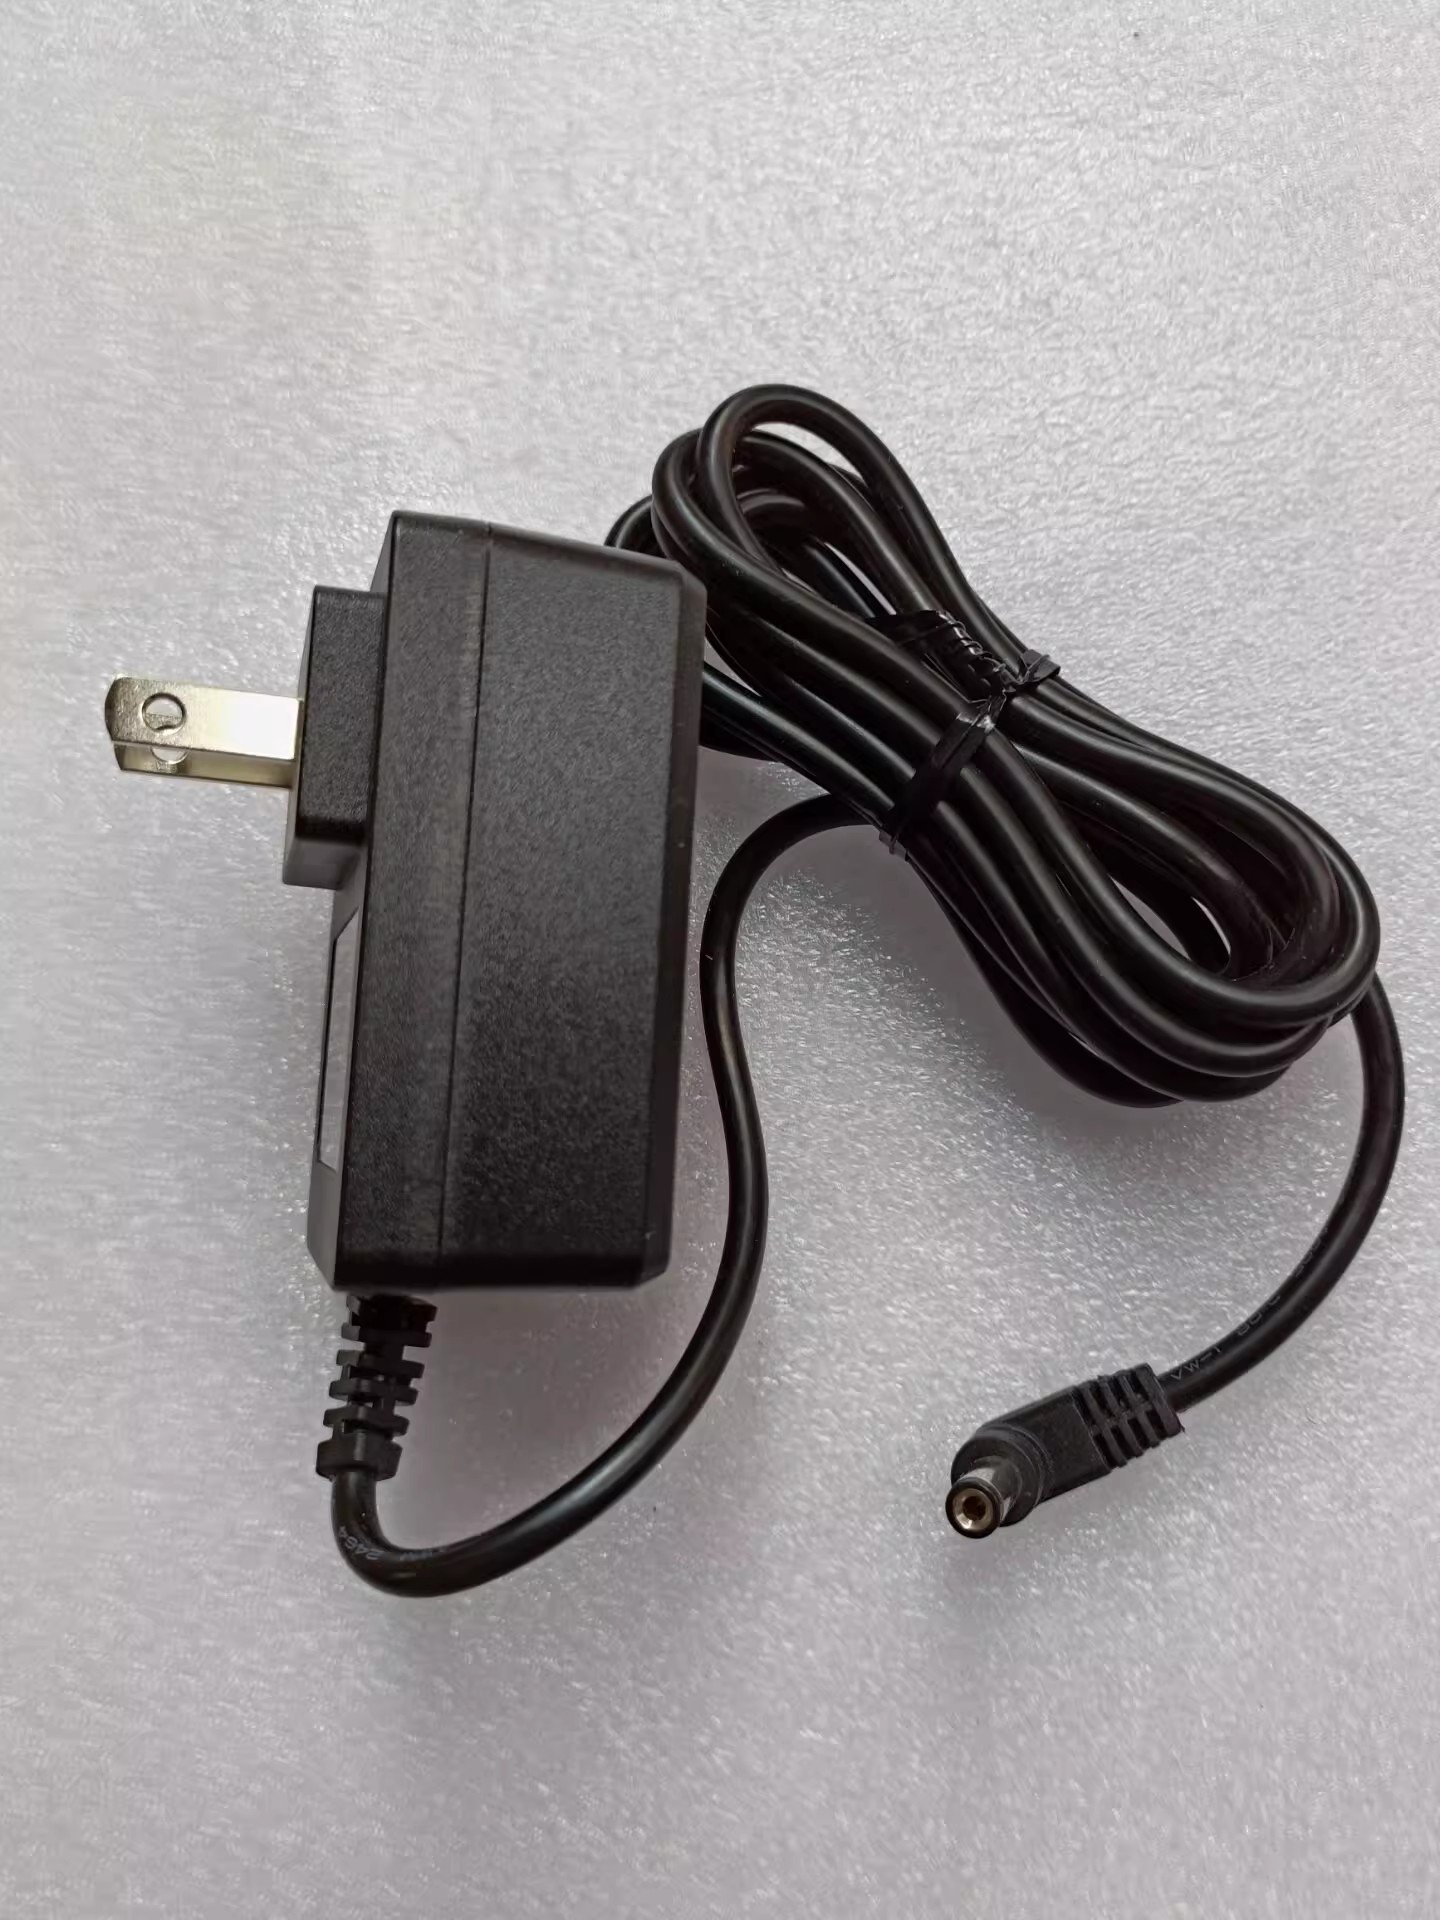 *Brand NEW* 26V 0.8A AC DC ADAPTHE TINECO YLS0241A-J260080 POWER Supply